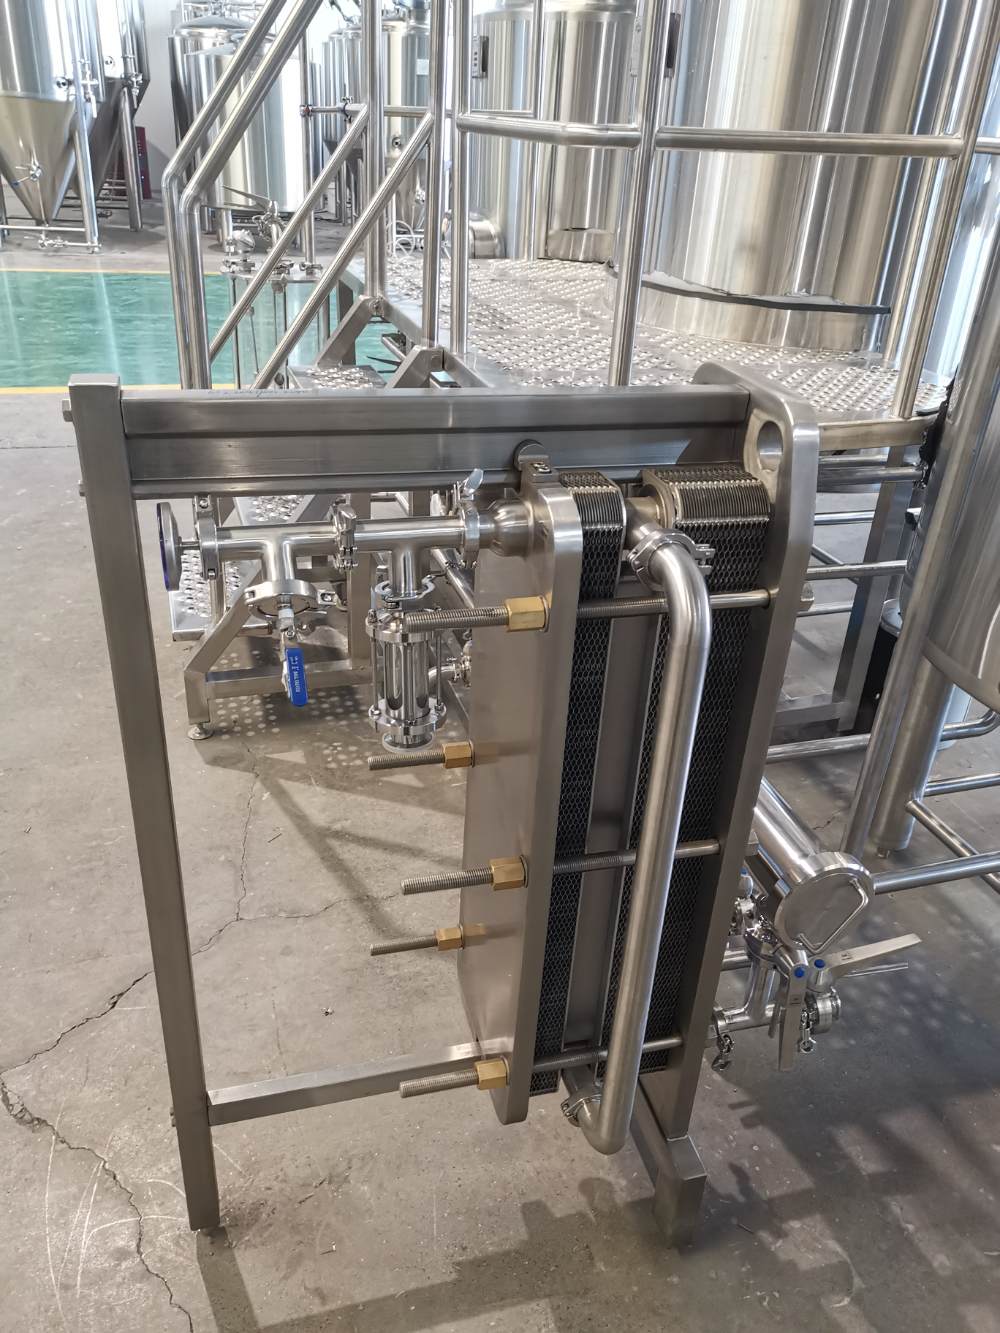 microbrewery, brewhouse, beer brewing system,beer fermentation tank,beer brewing equipment,brewing house